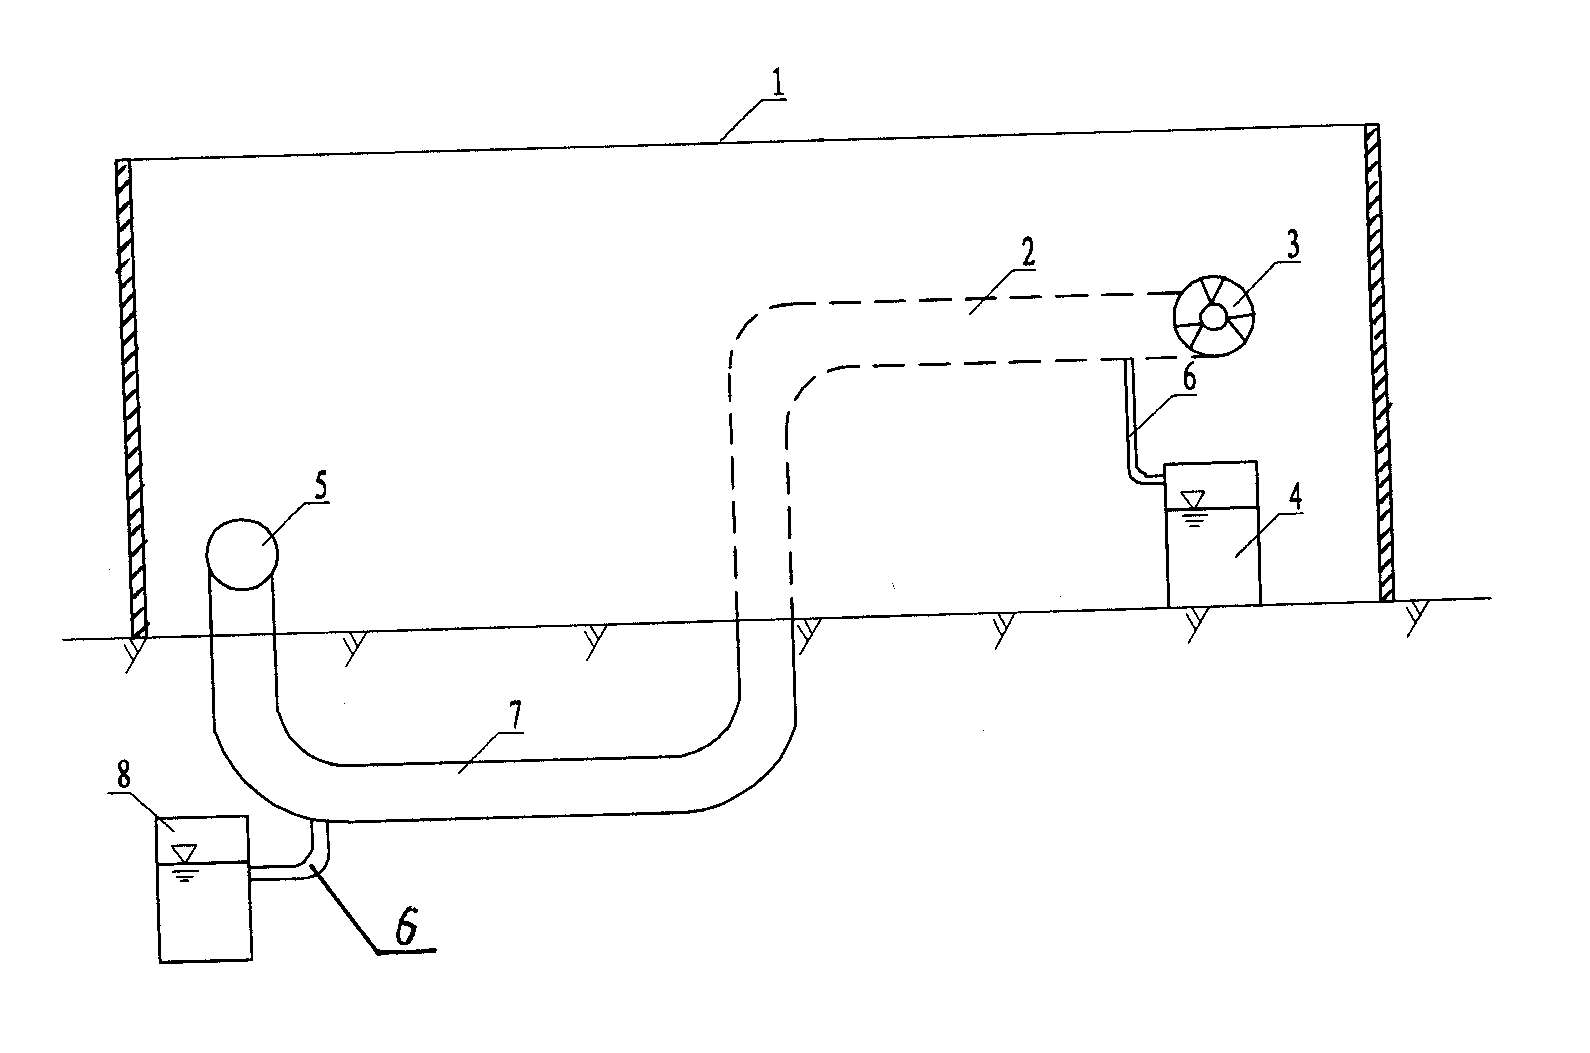 Device used for making irrigation water in condensing mode inside temperature-controlled greenhouse